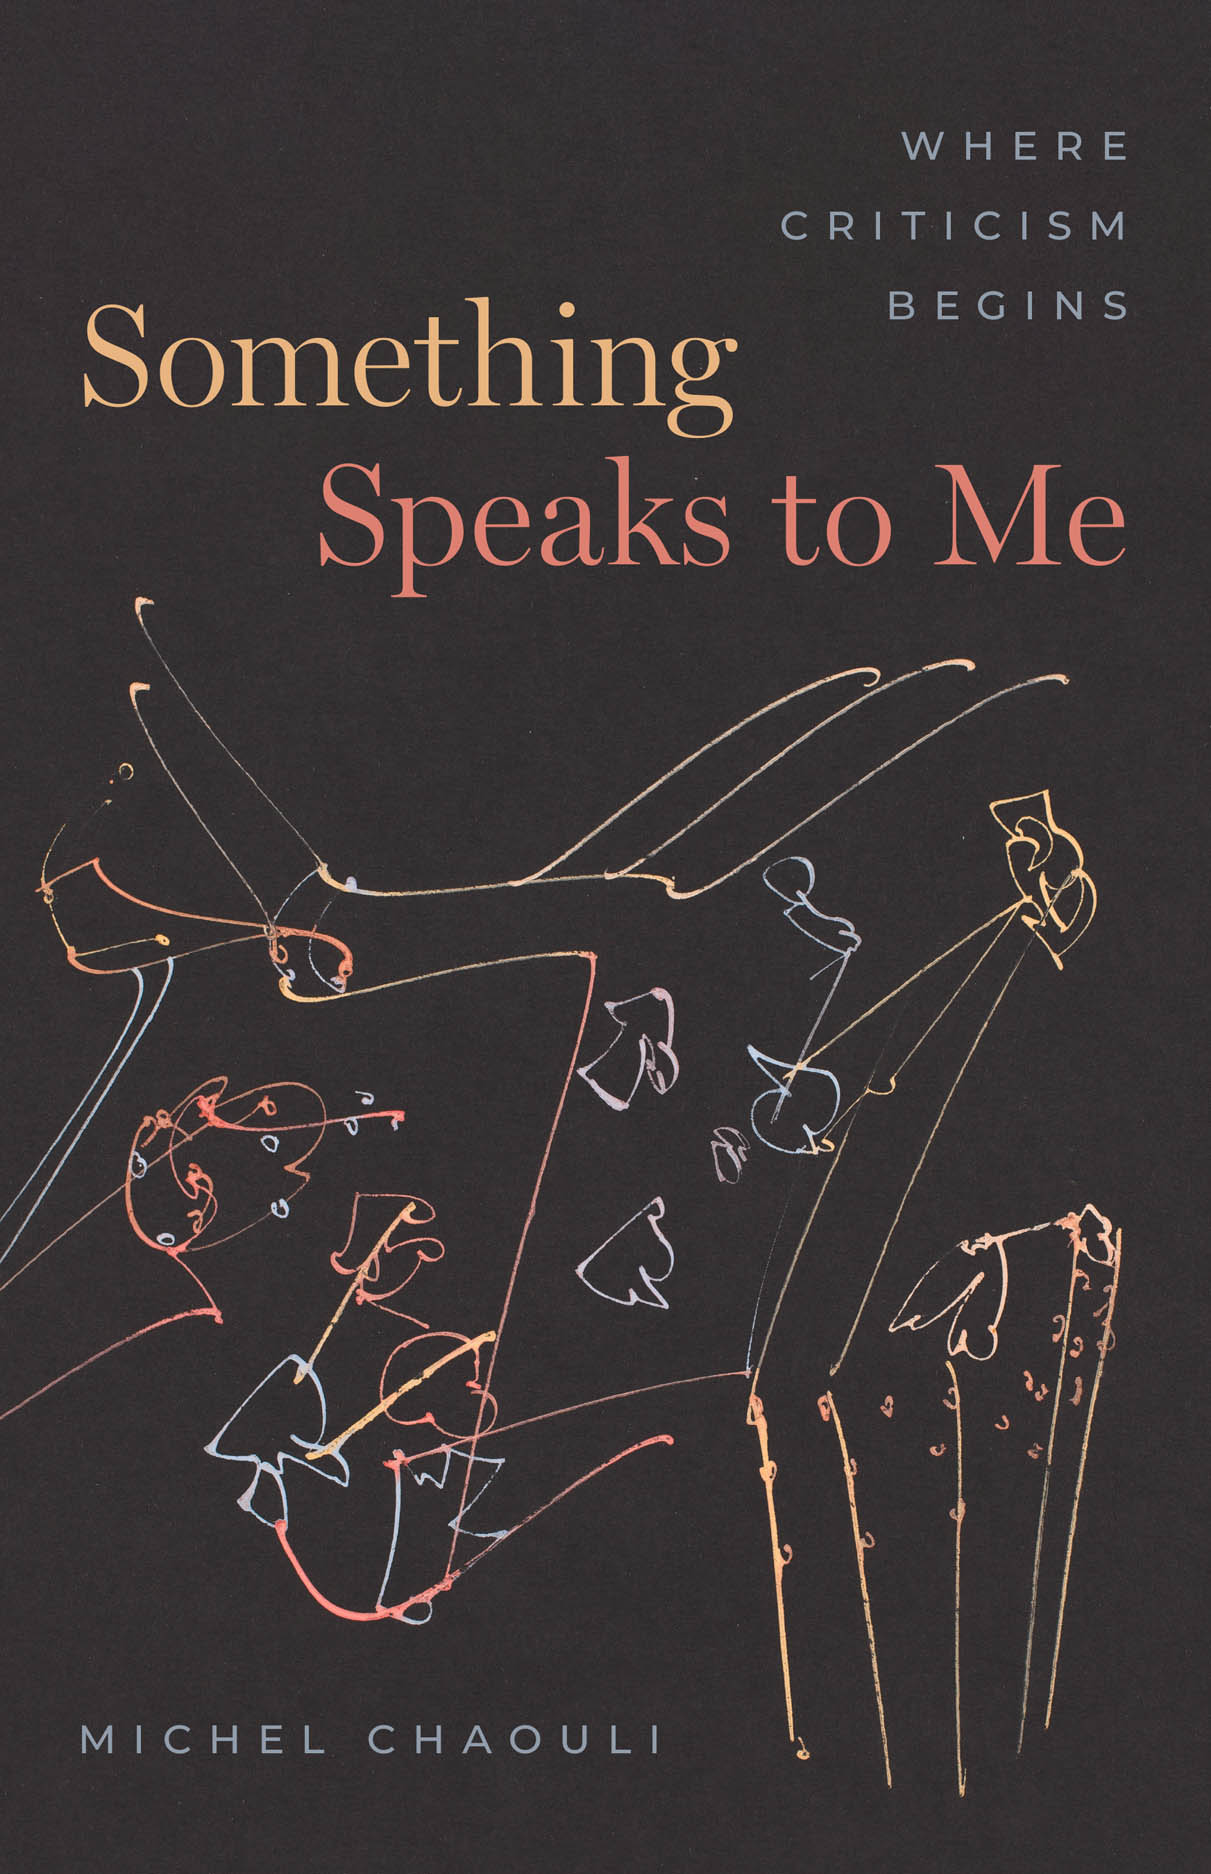 Book cover for Something Speaks to Me: Where Criticism Begins by Michel Chaouli. The cover has a dark background and a sketch in blue, yellow, and red.